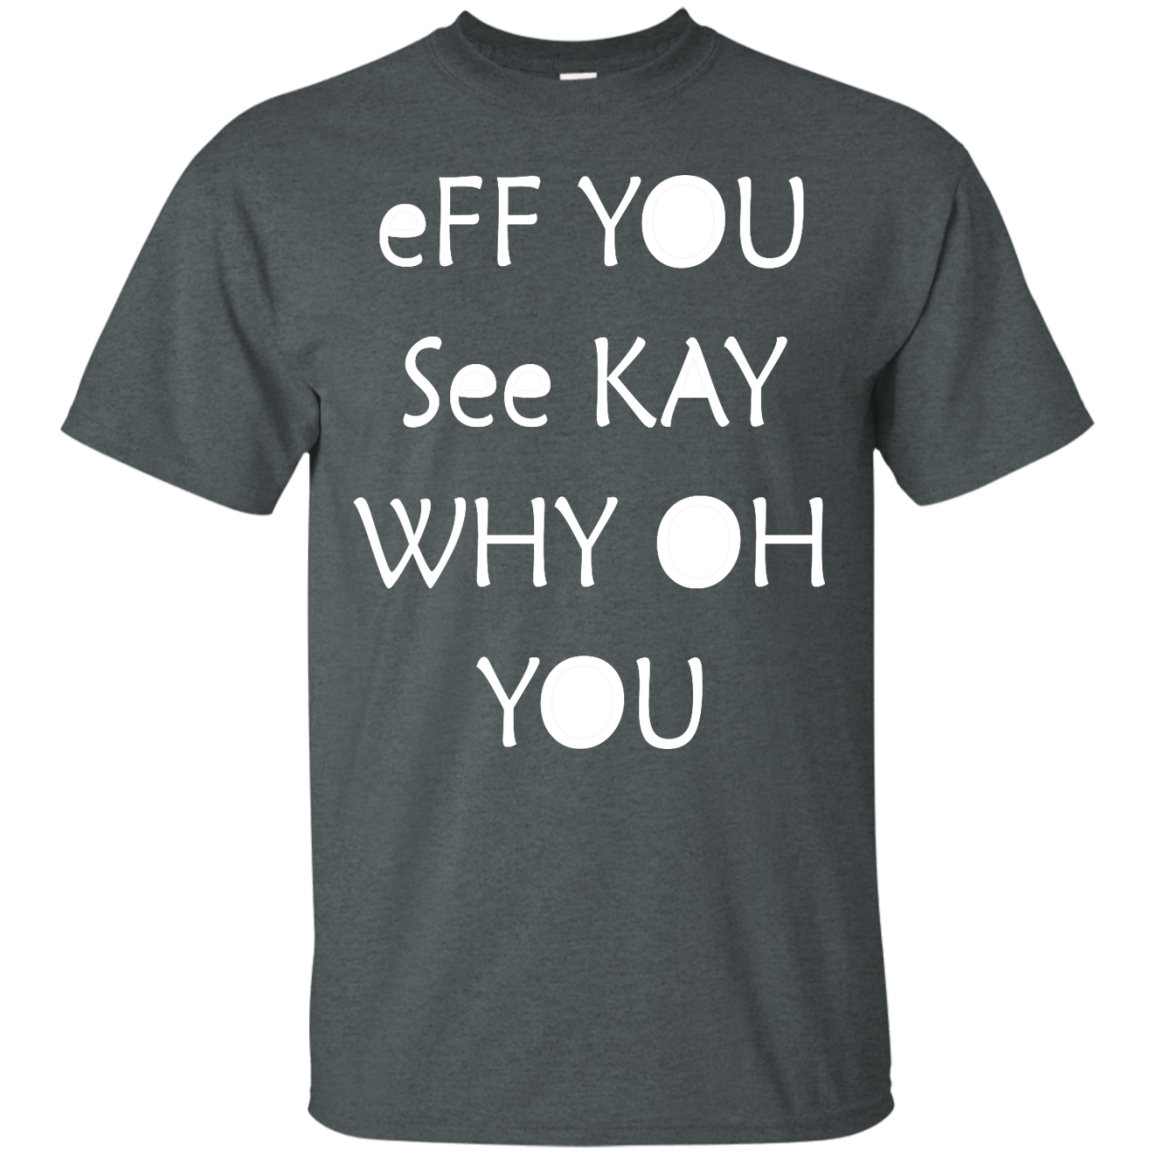 Eff you see kay why oh you shirt, tank, racerback - iFrogTees